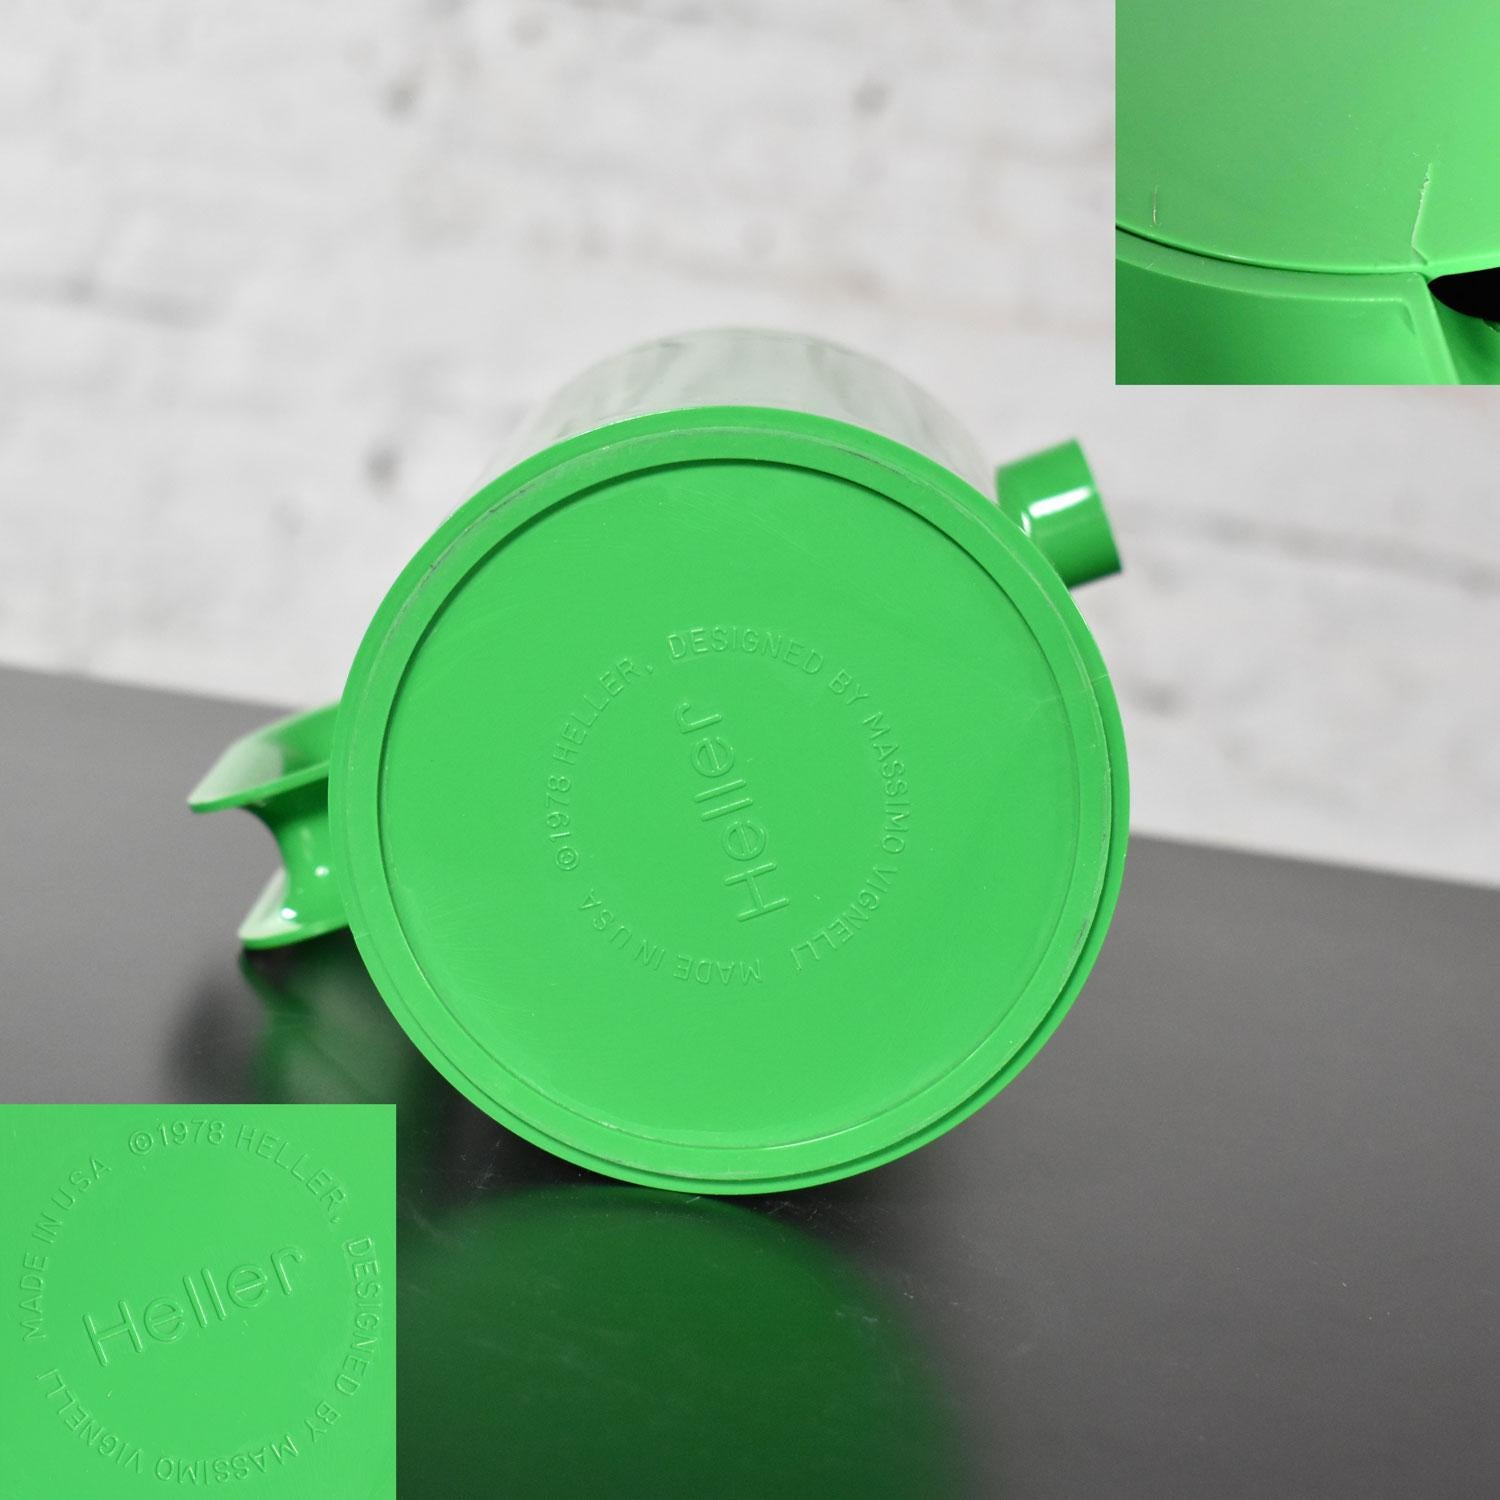 Heller Dinnerware by Lella & Massimo Vignelli in Kelly Green 58 Pieces & Napkins 4